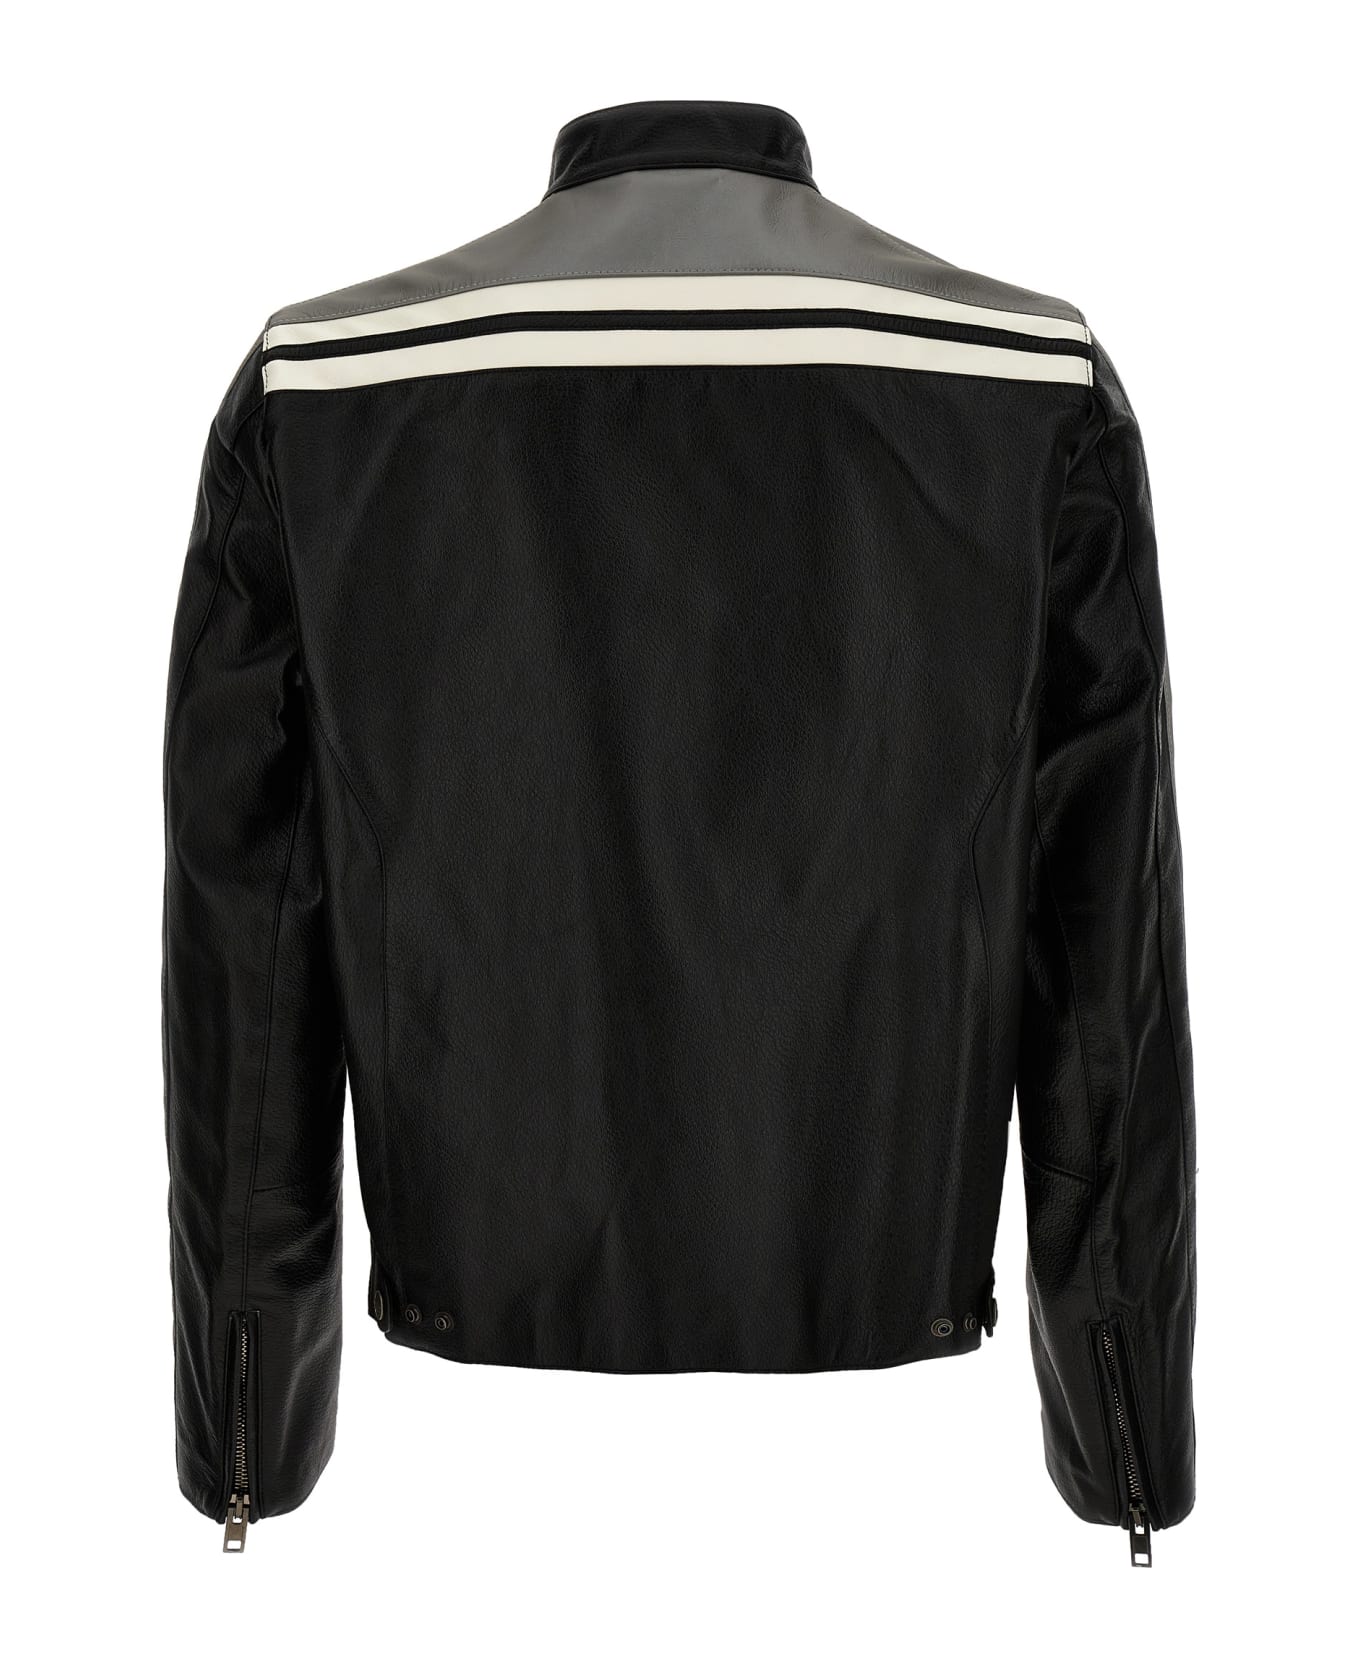 Moschino Leather Jacket With Contrasting Bands - Black  